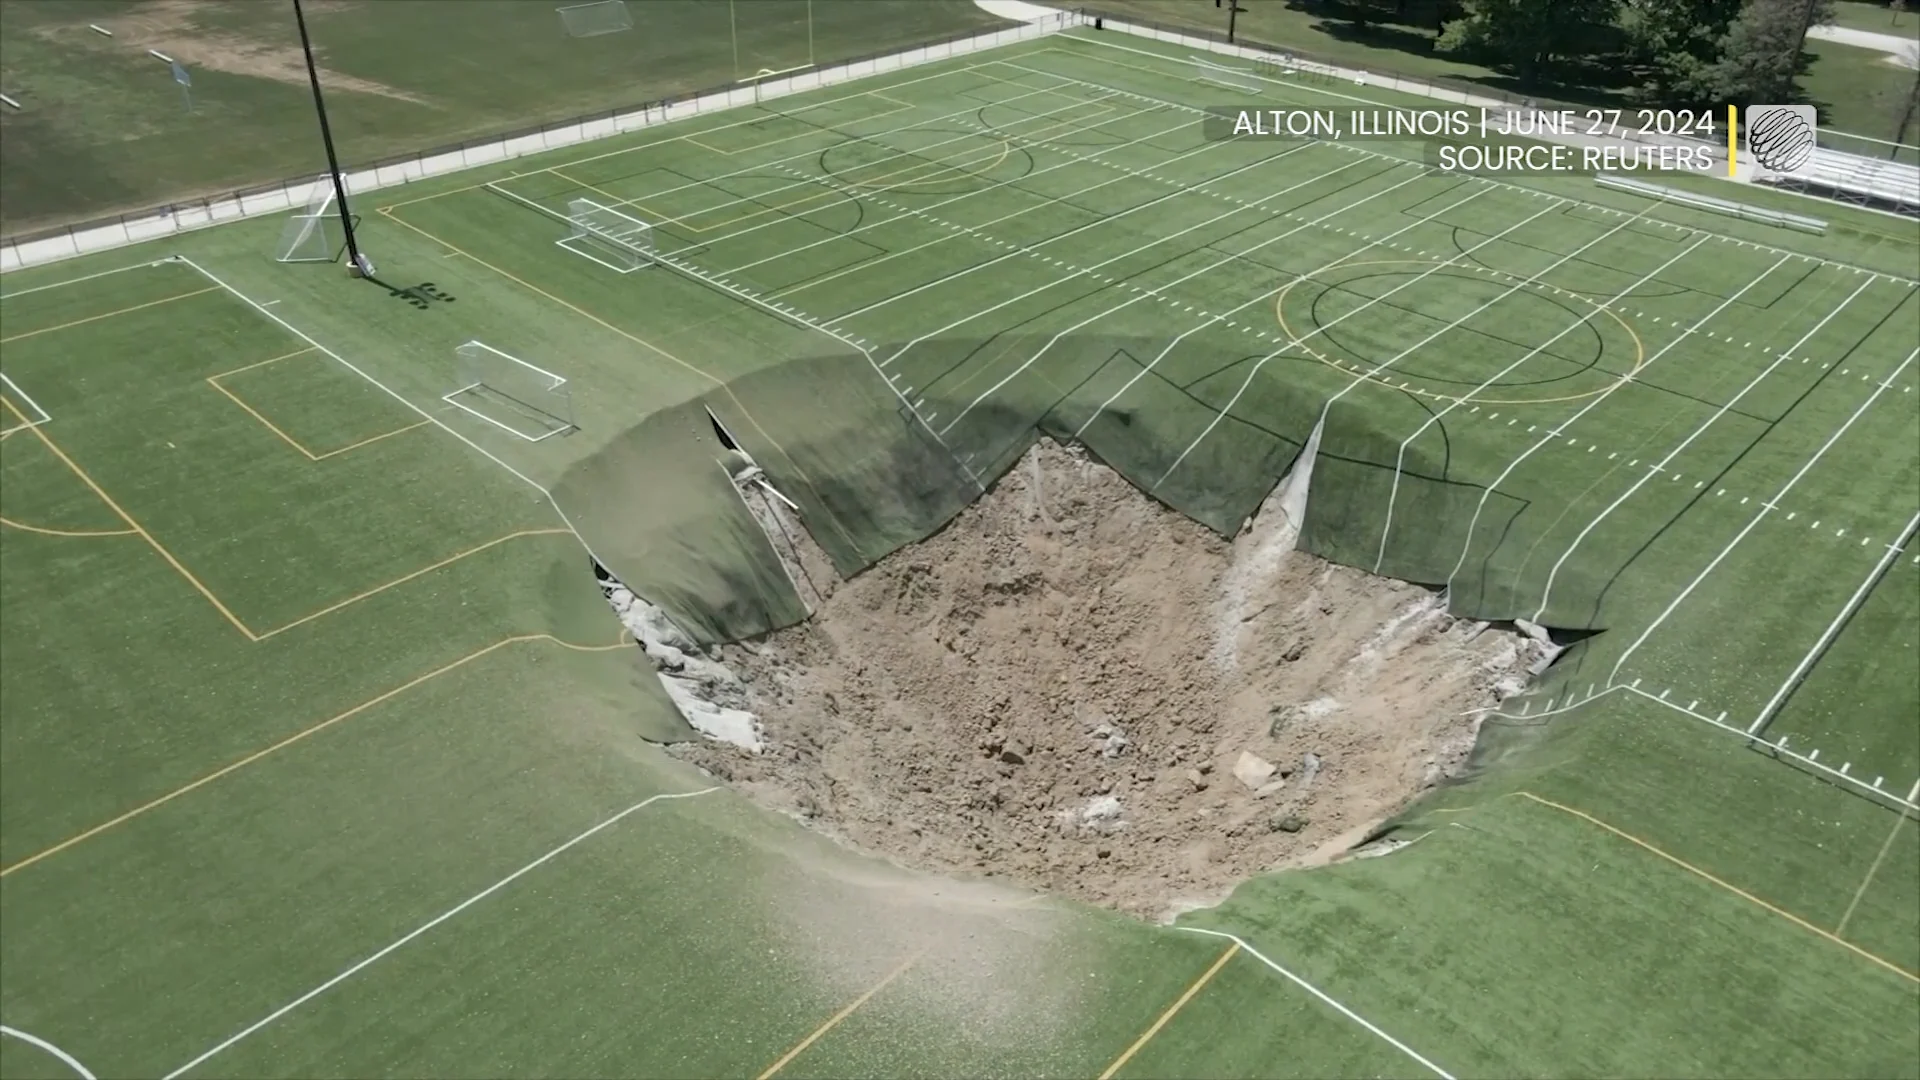 Watch the terrifying moment a sinkhole opened up in the middle of this soccer field